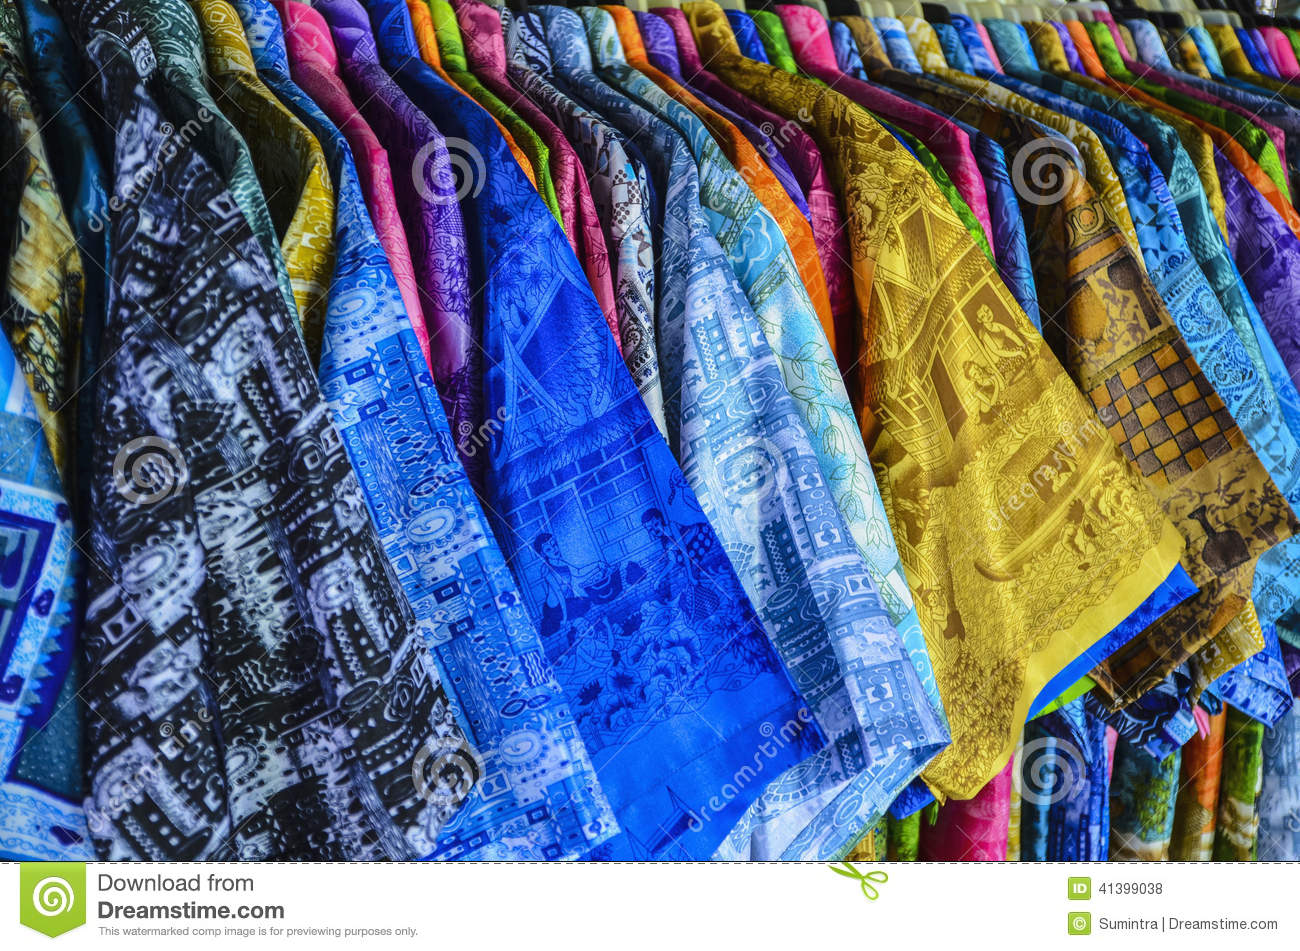 This Colorful Clothing Thailandclothes Pattern Thailand